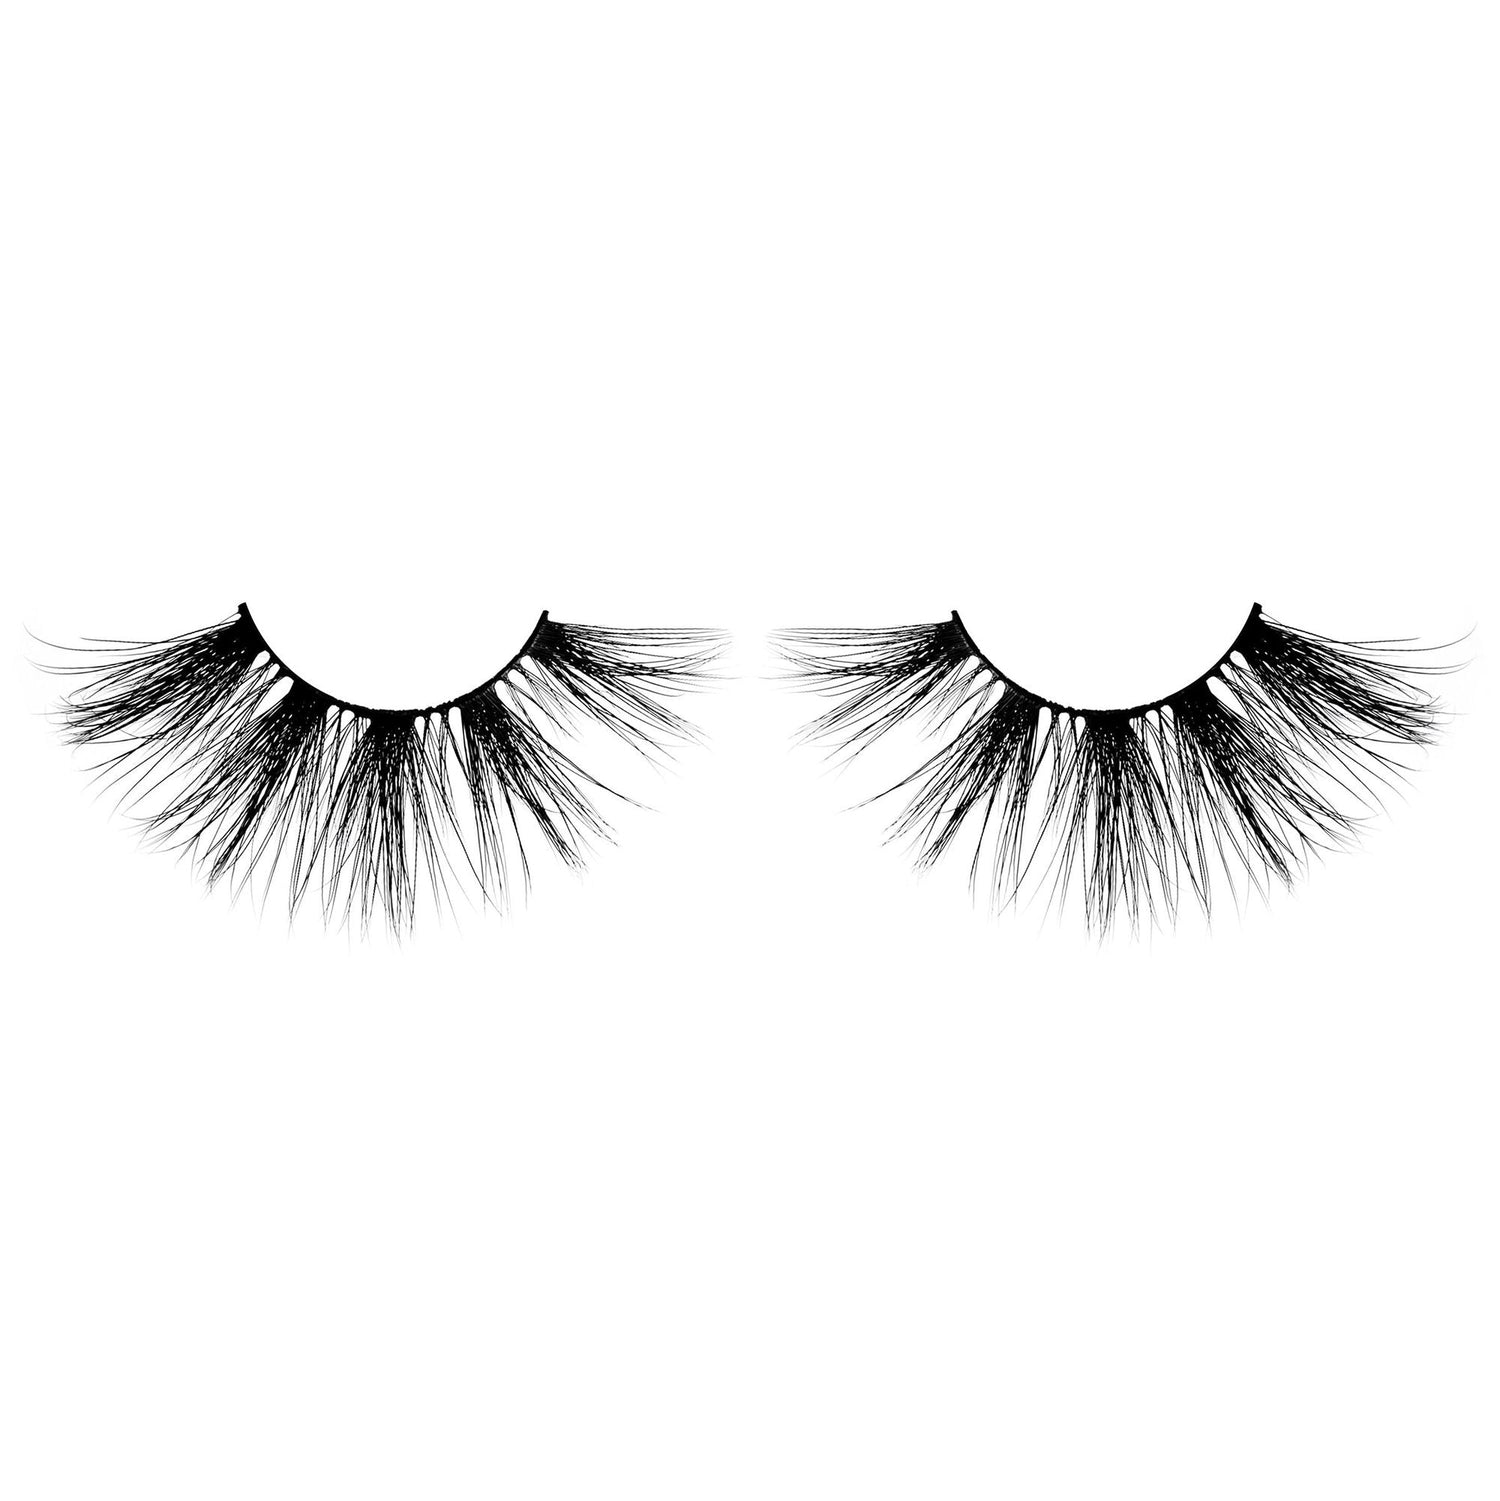 Glamour Us_Beauty Creations_Lashes_ATTENTION SEEKER 35 MM Faux Mink Lashes__BC-35MMFL-AS